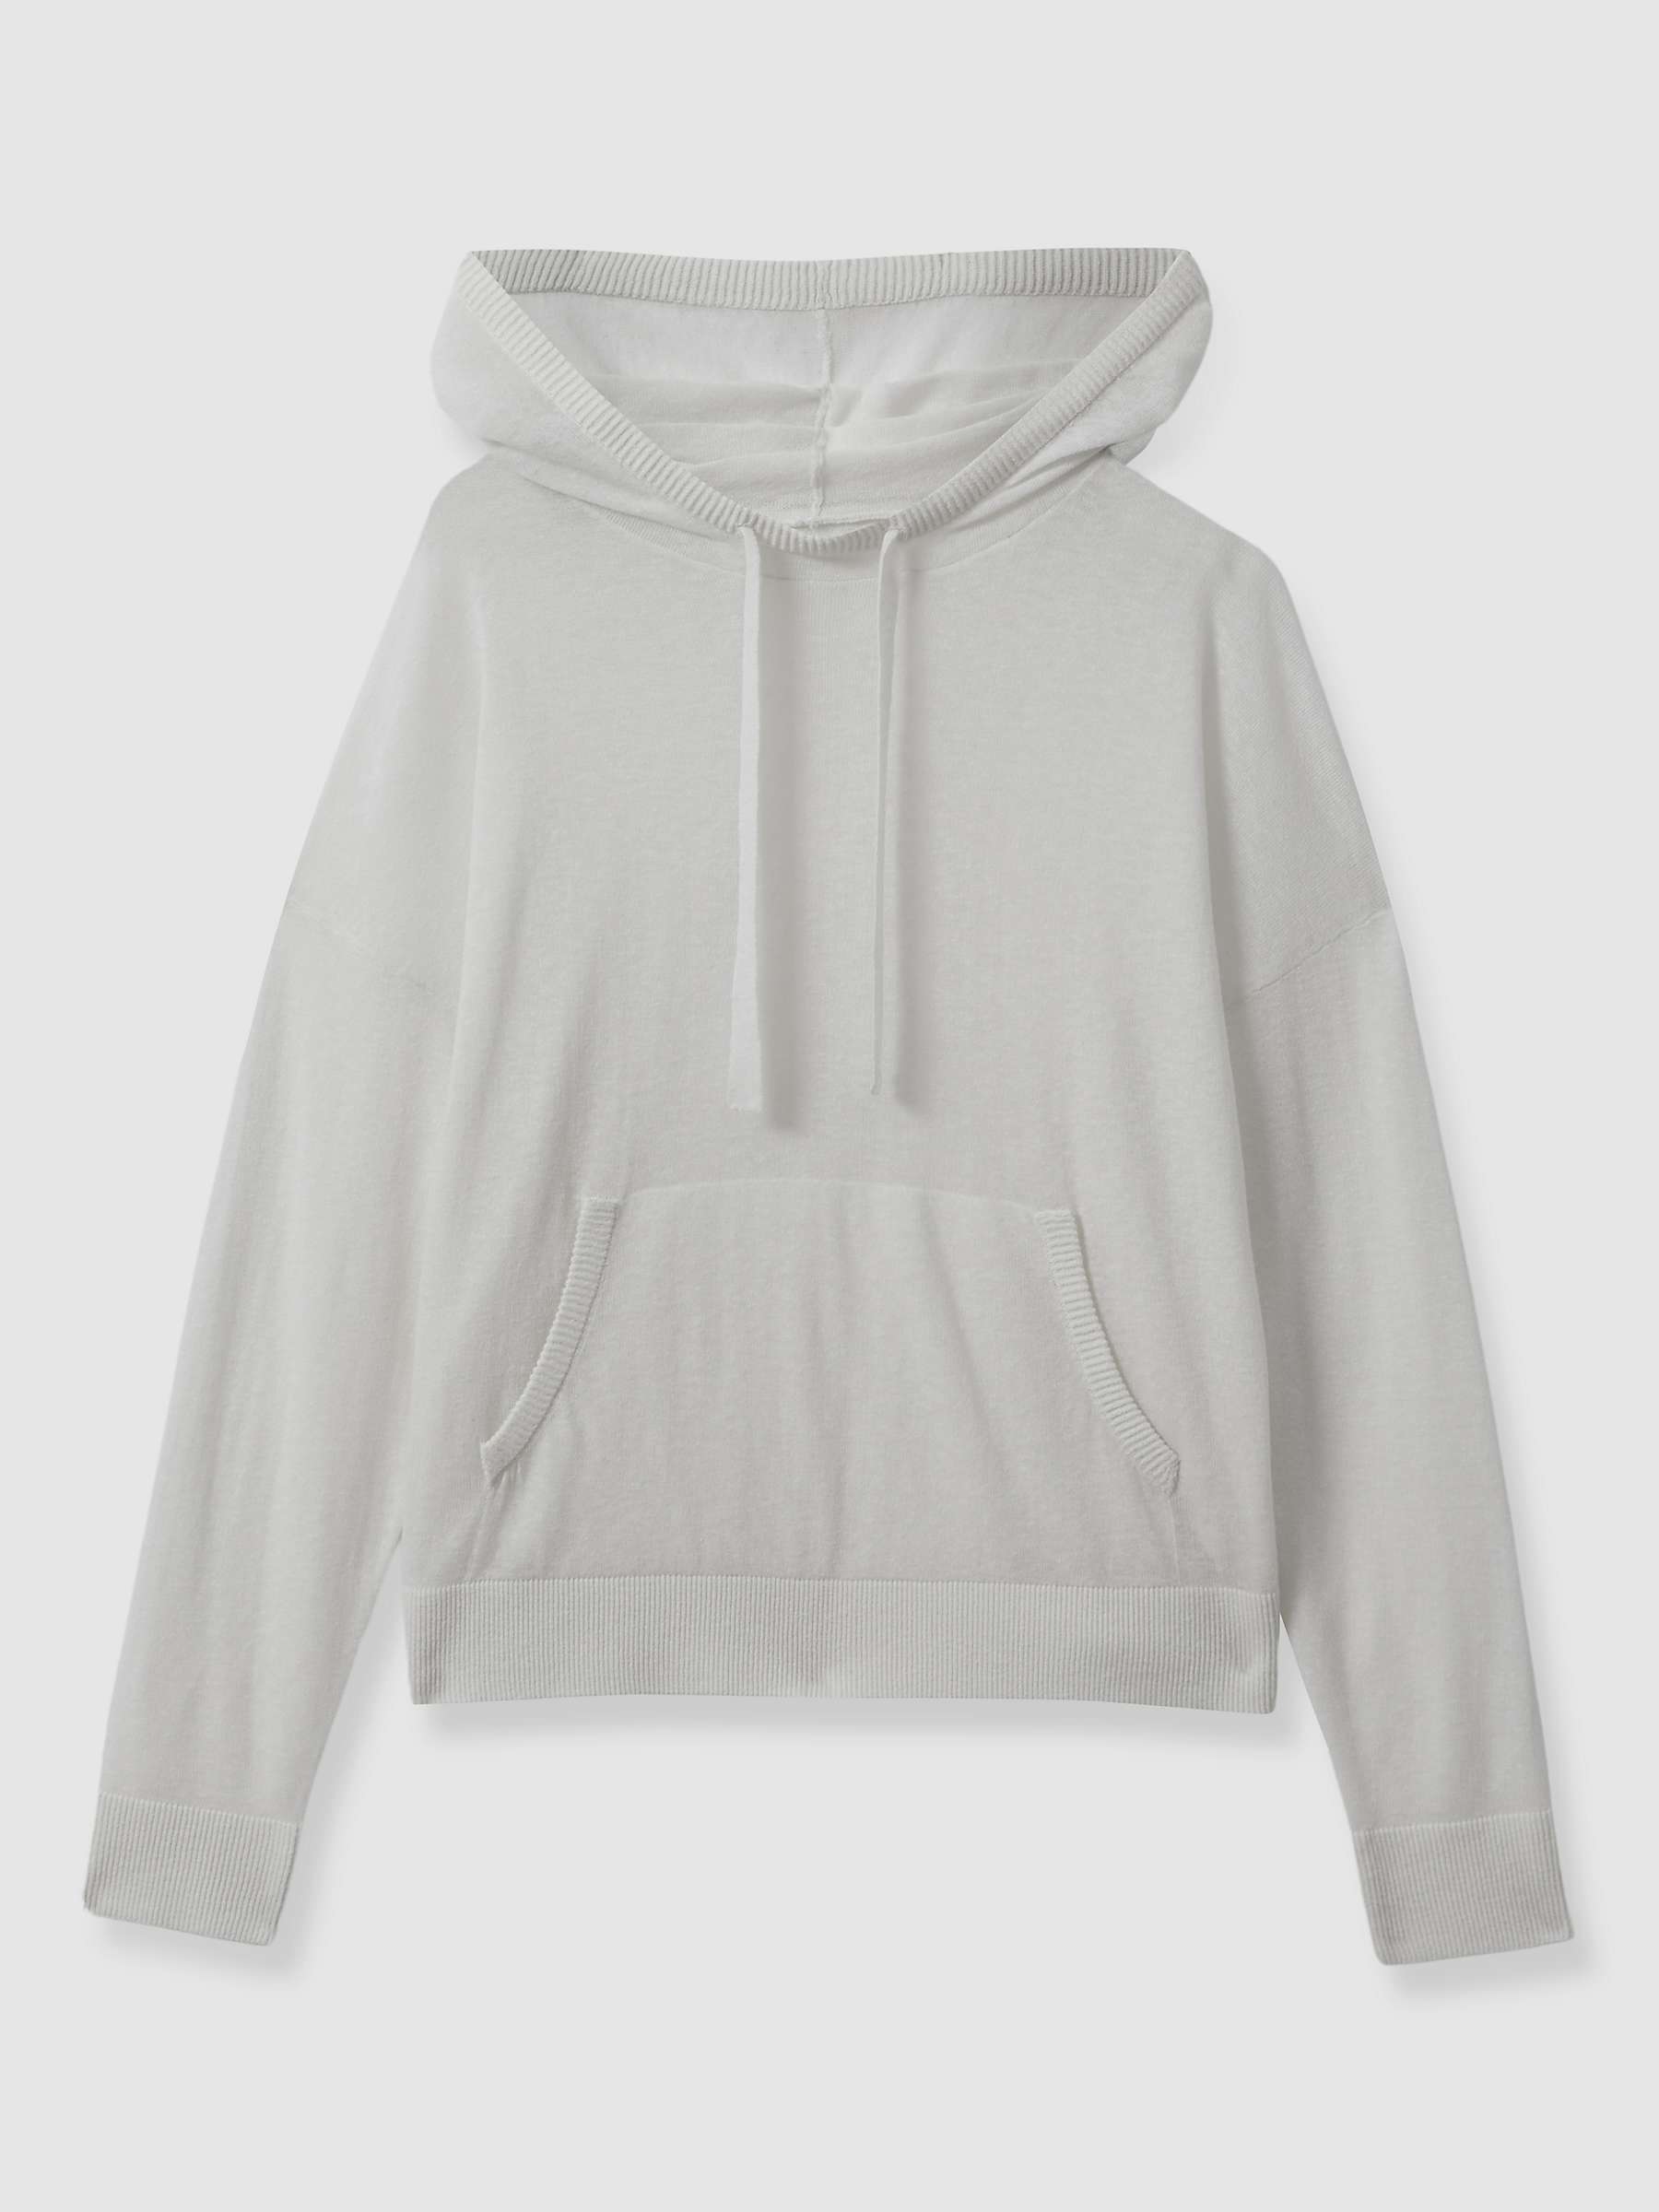 Buy Reiss Candy Linen Blend Hoodie, Ivory Online at johnlewis.com